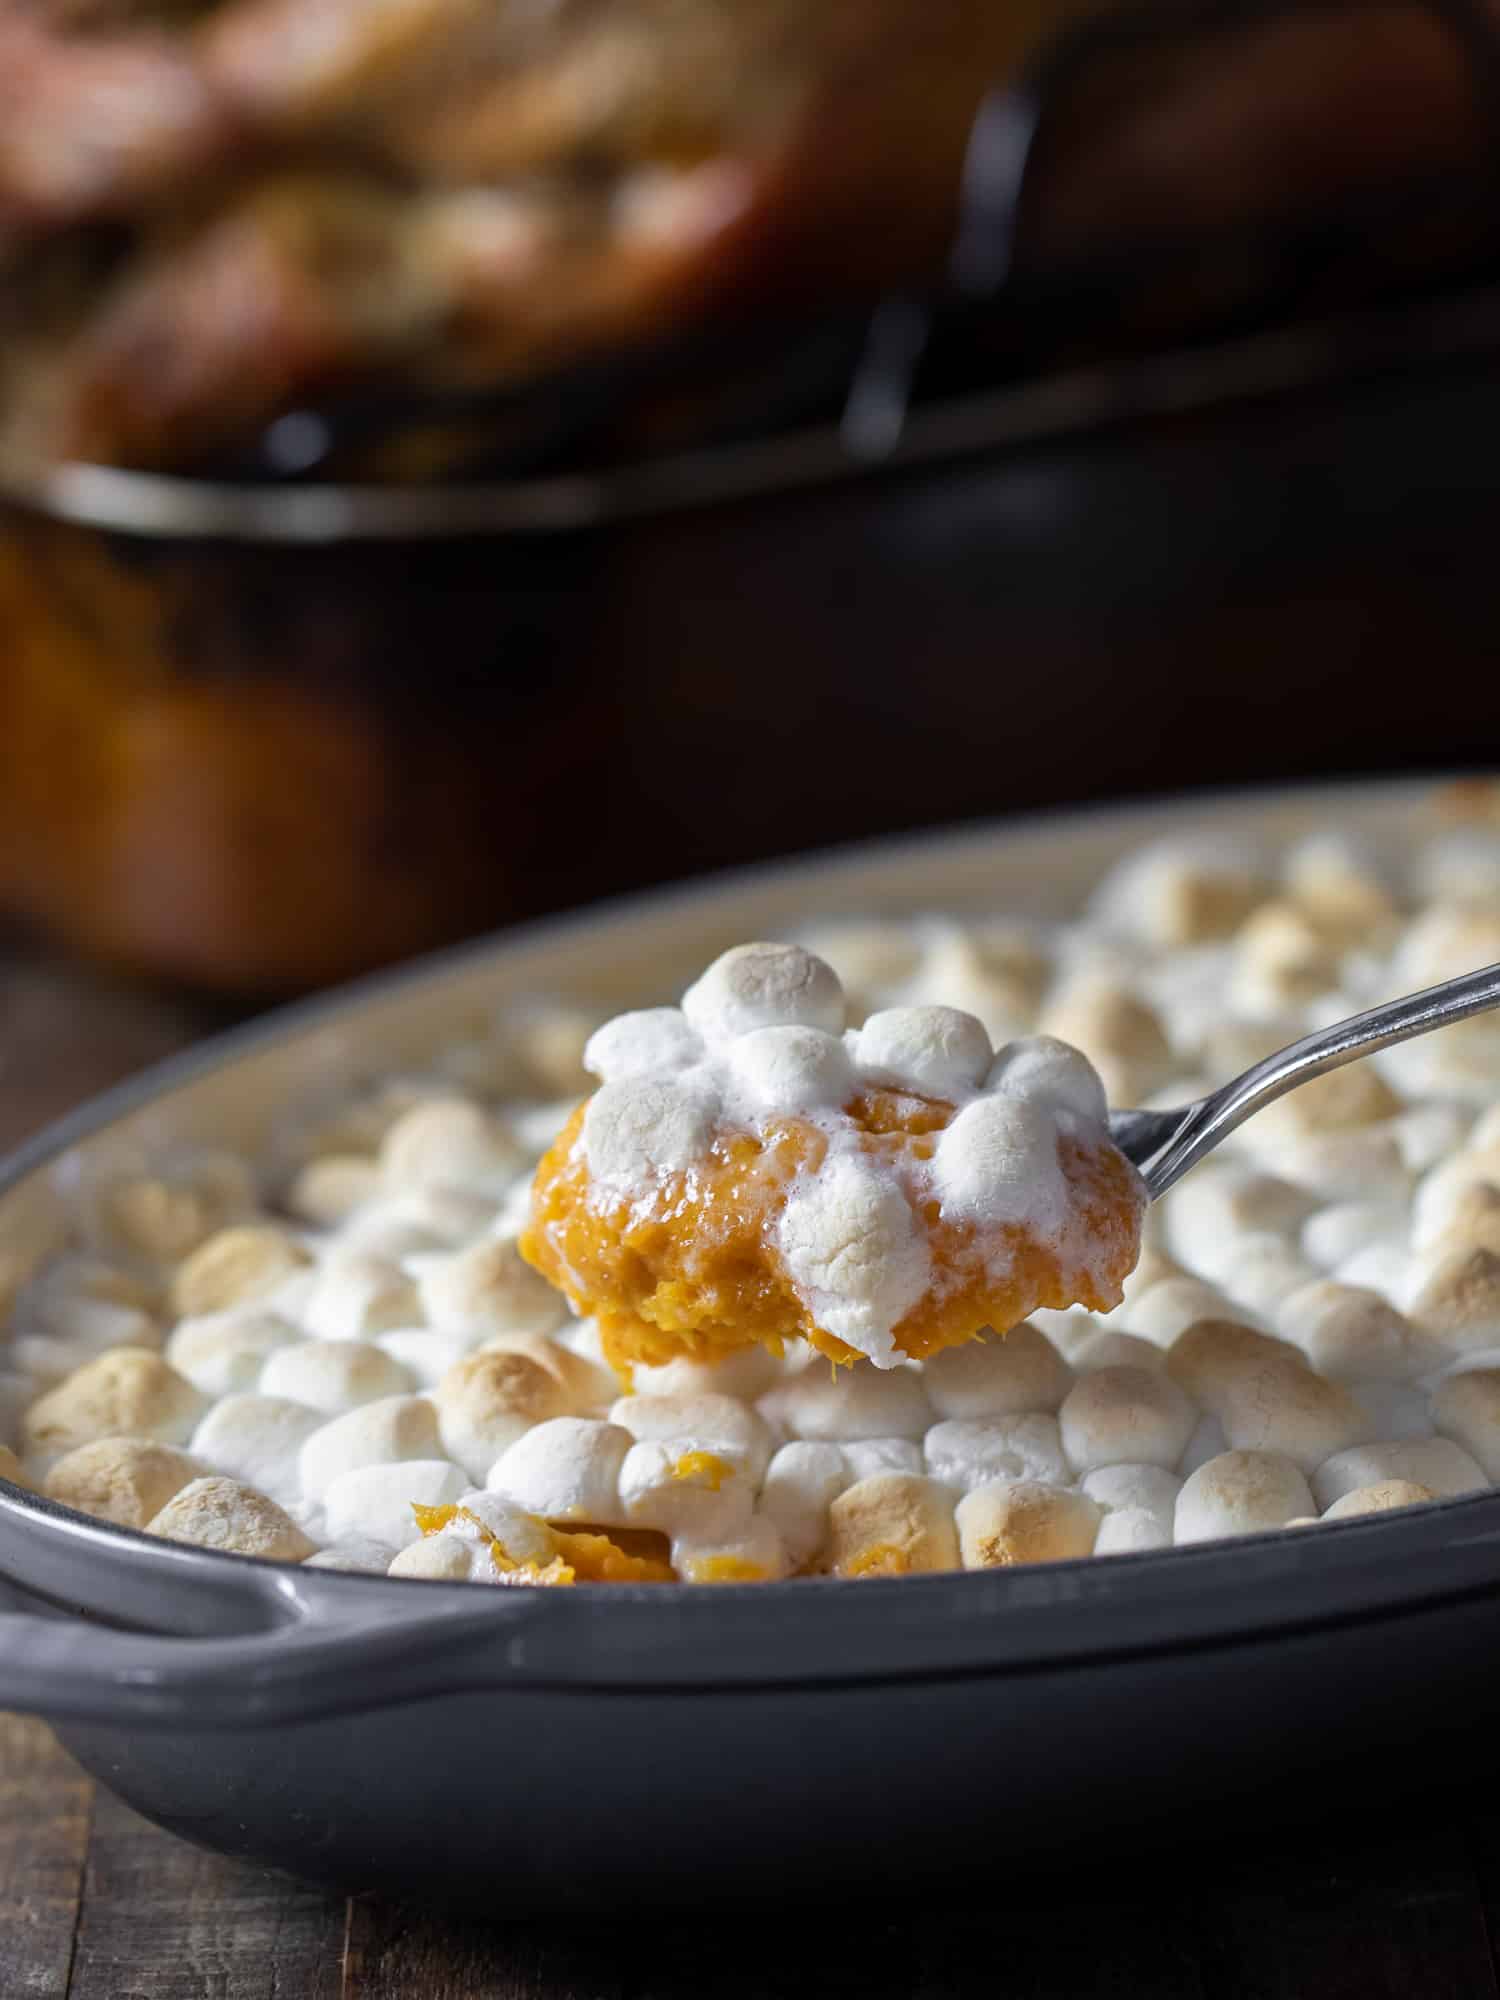 Scooping a spoonful of sweet potato casserole with toasted marshmallow topping